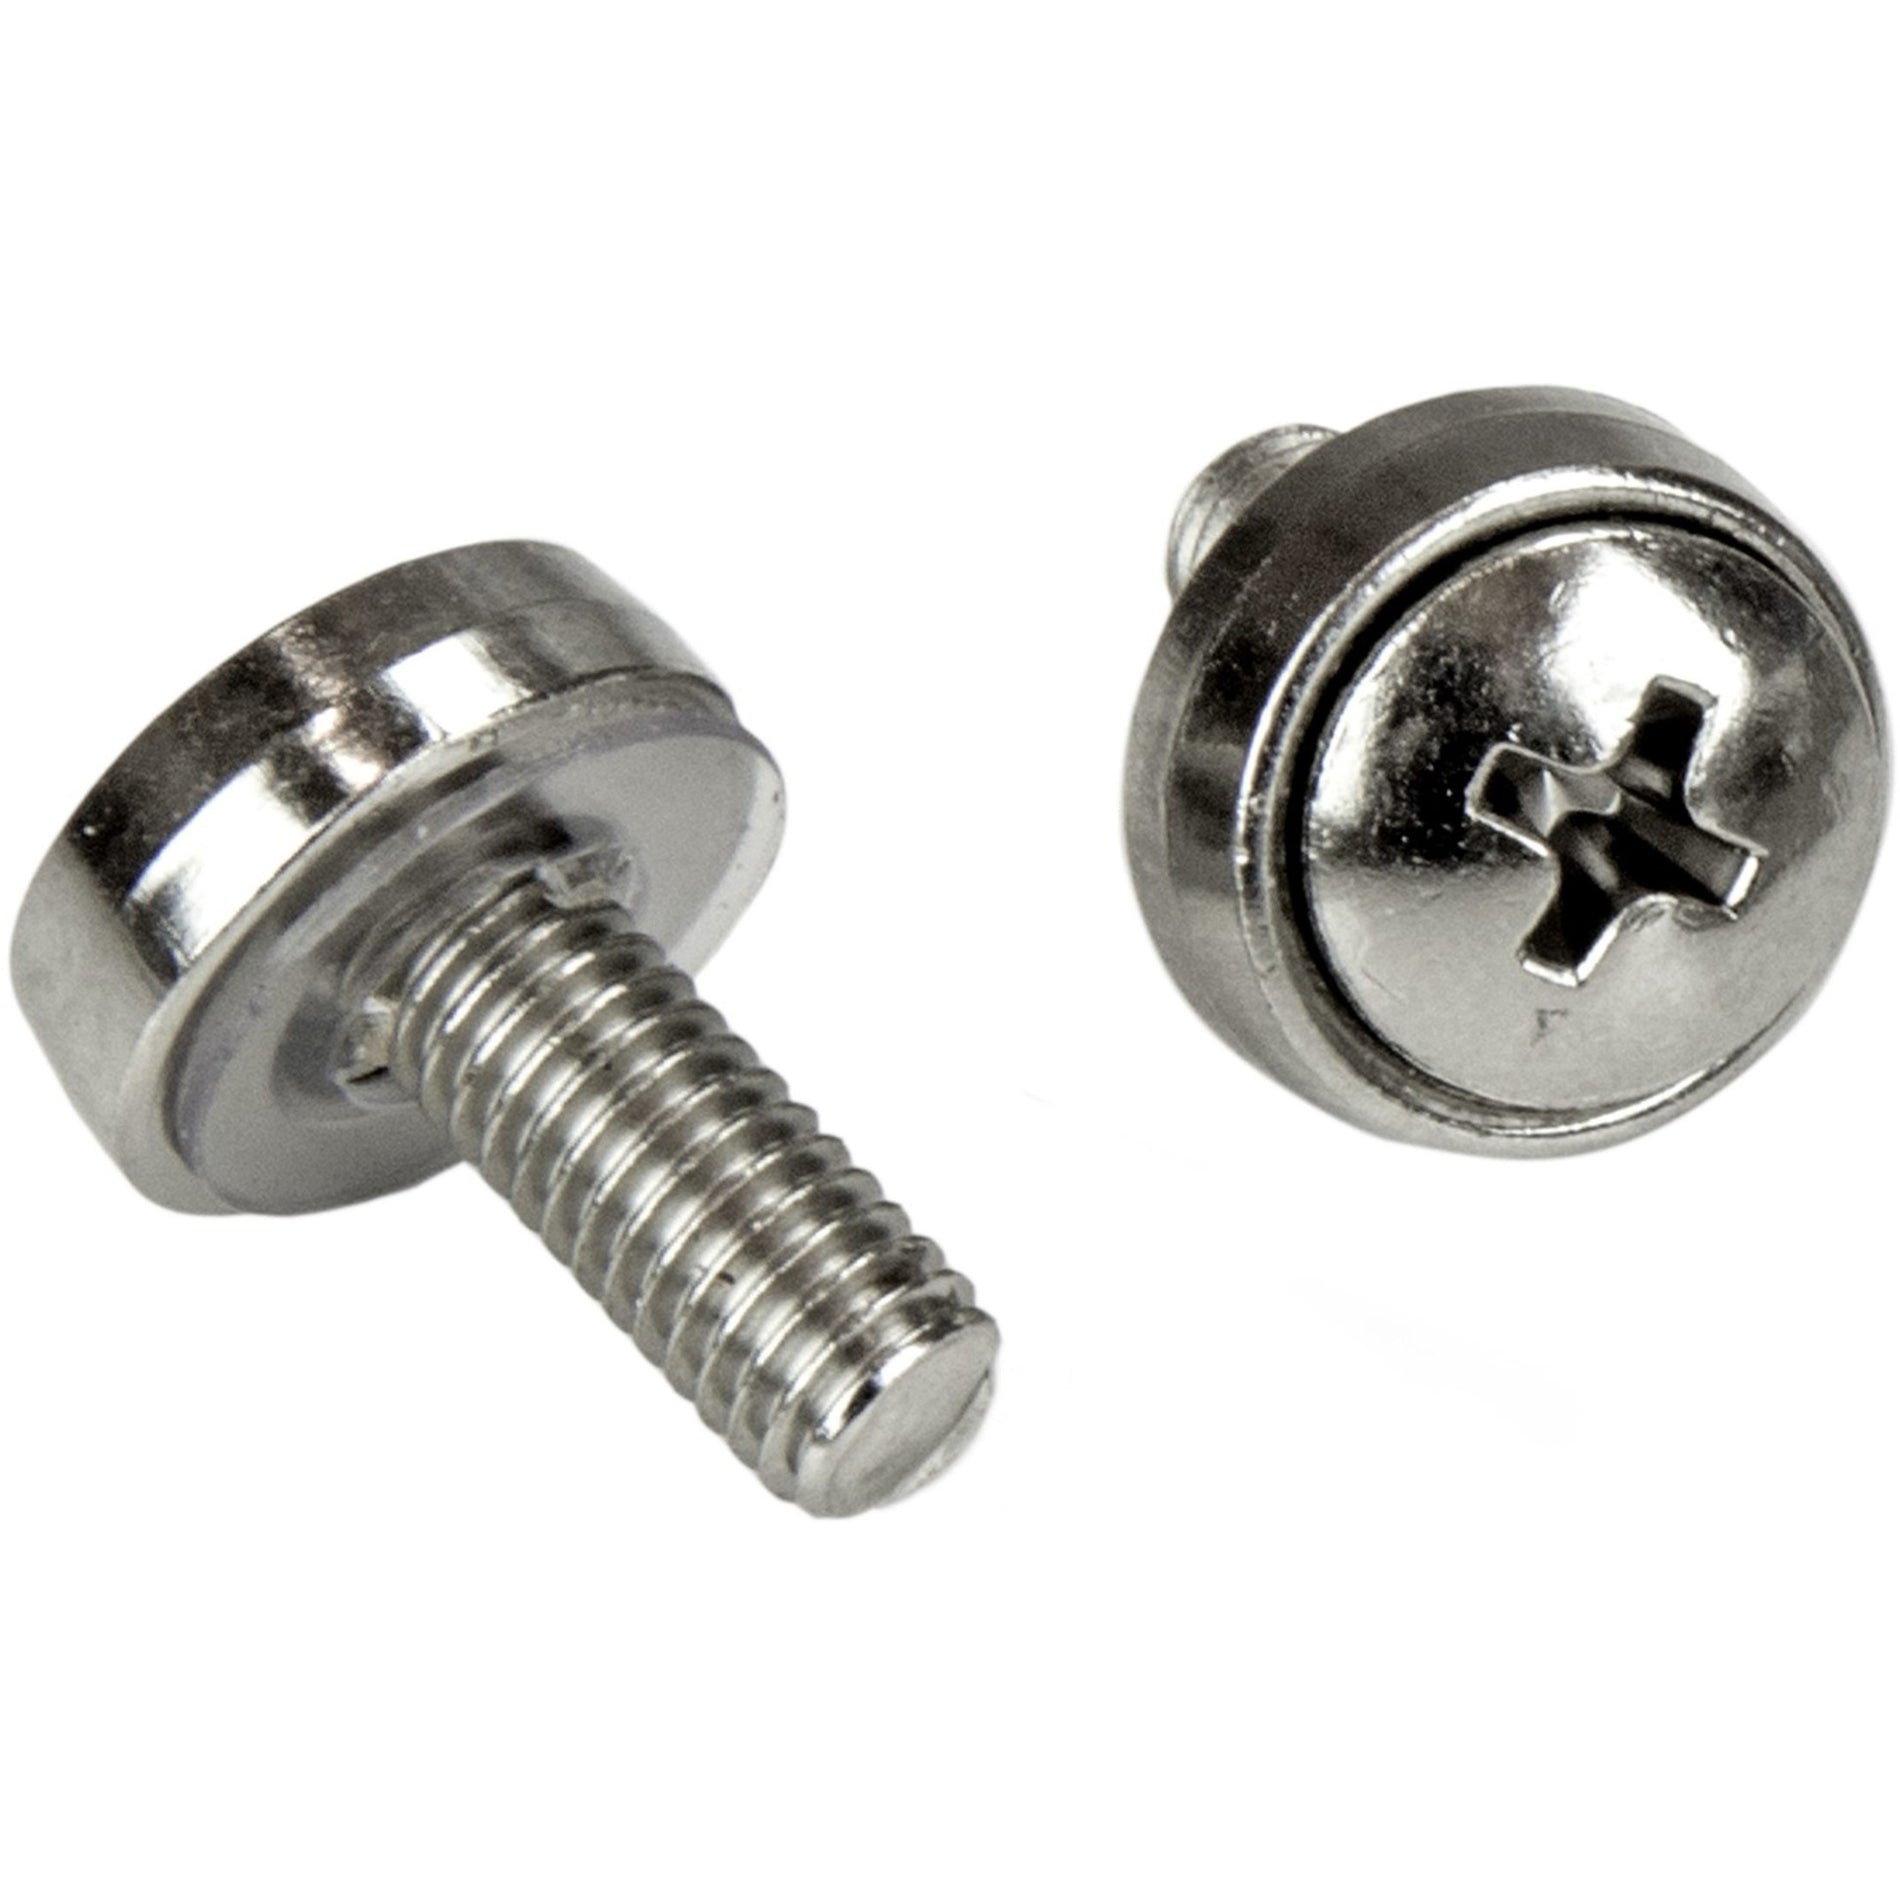 StarTech.com CABSCREWM52 100 Pkg M5 Mounting Screws and Cage Nuts for Server Rack Cabinet, Rust Resistant, Nickel Plated